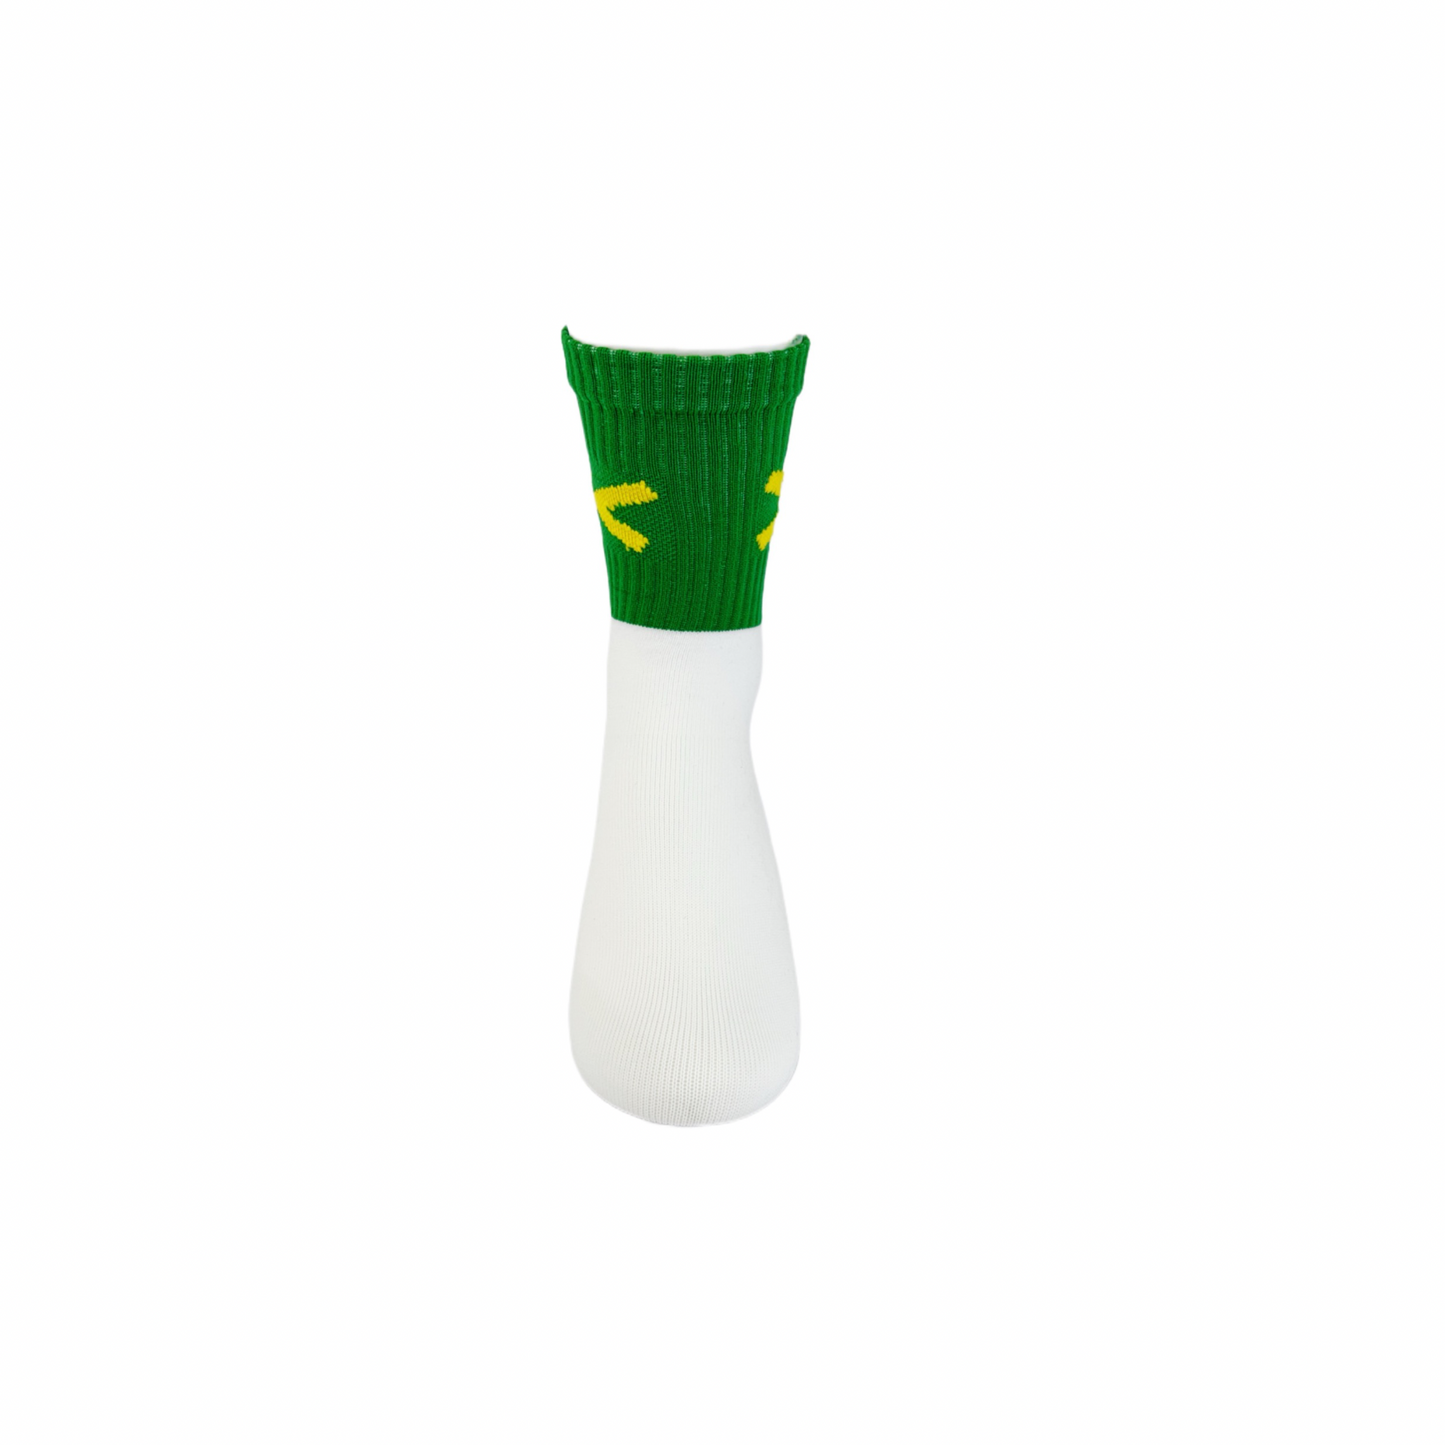 New and Improved X Gaelic Games Sock (Green and Yellow)